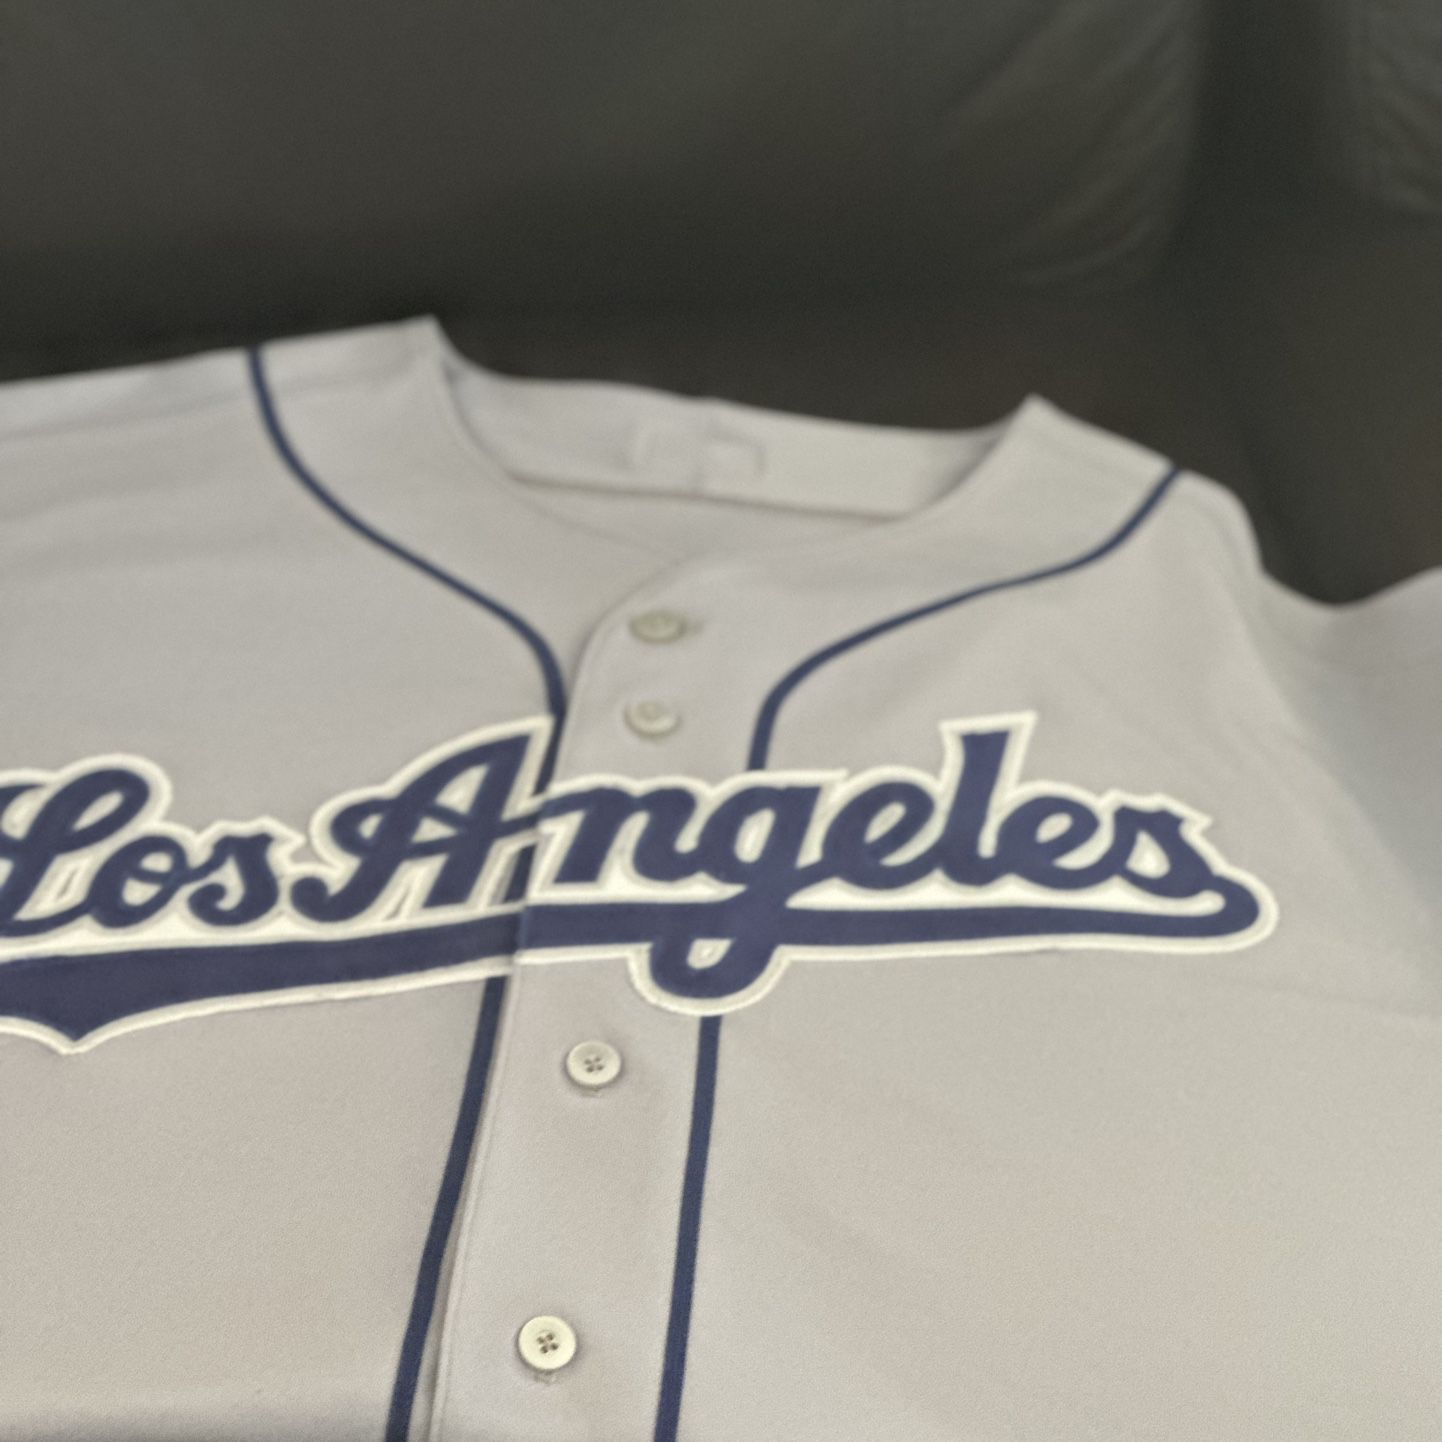 Dodgers Jersey Black Large $65 Firm On Price for Sale in Buena